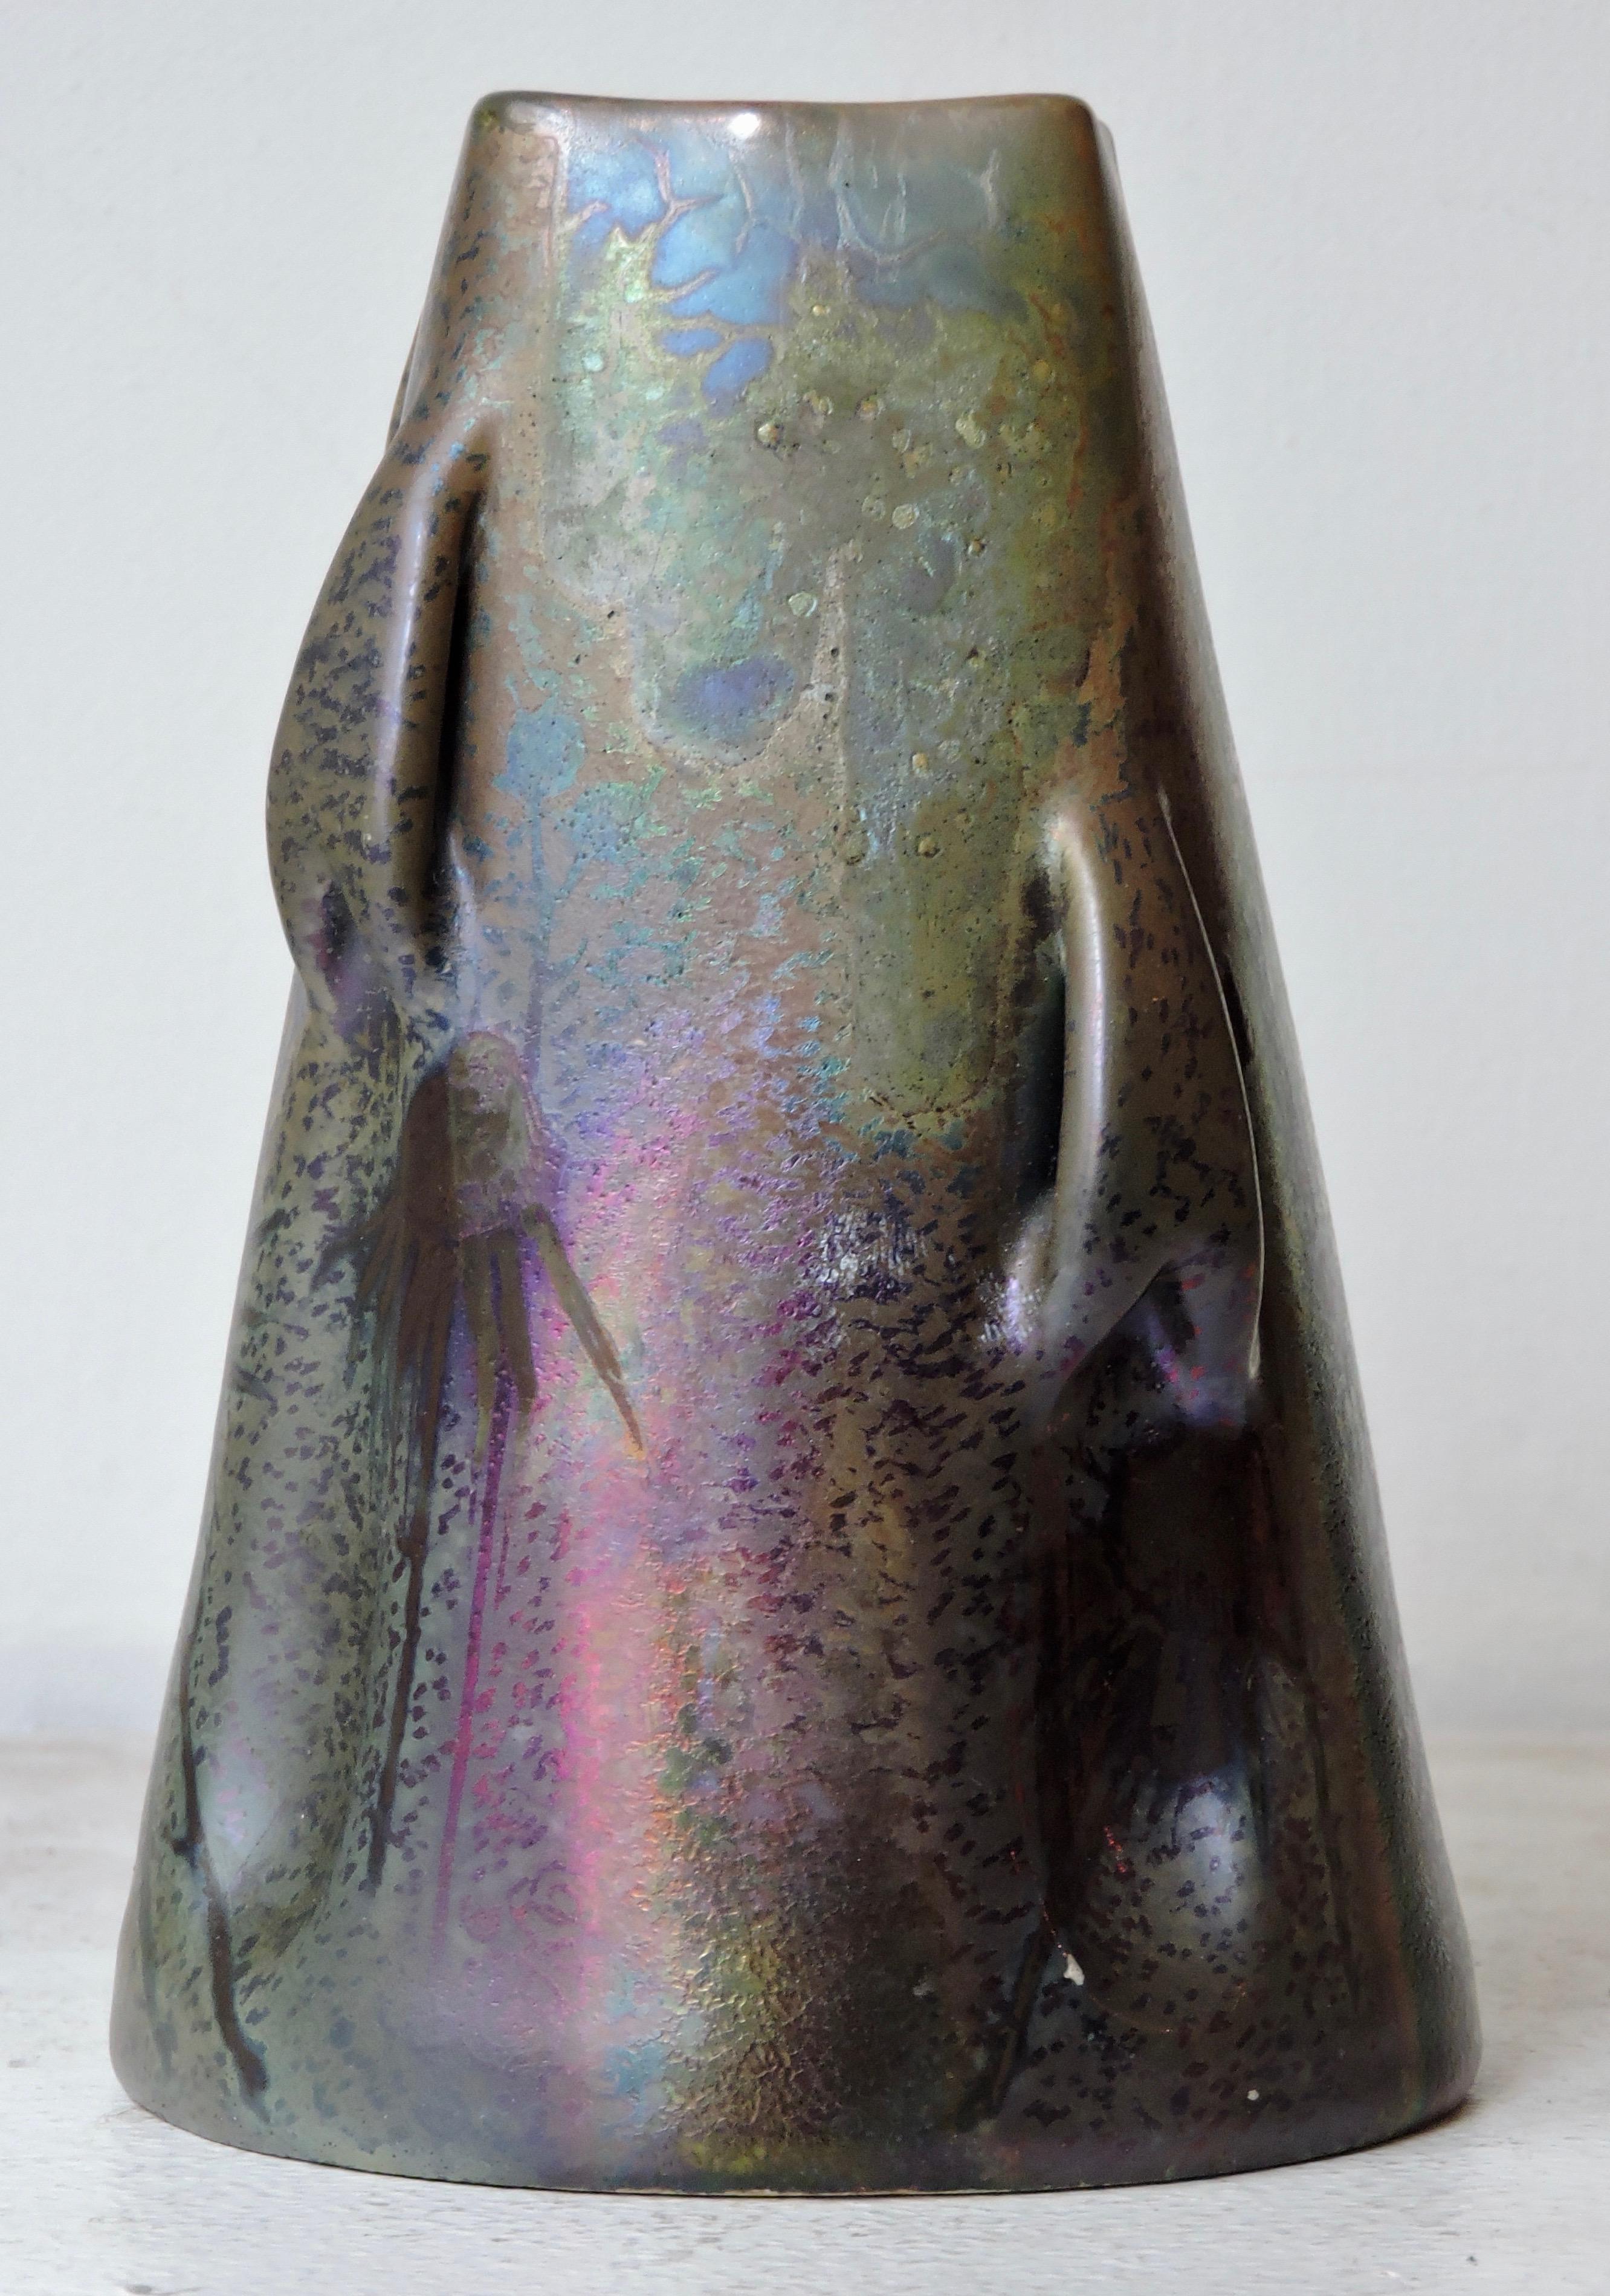 An iridescent glazed earthenware vase by Clément Massier
Thistle and mushrooms design
Painted and impressed marks Clement Massier Golfe-Juan AM.